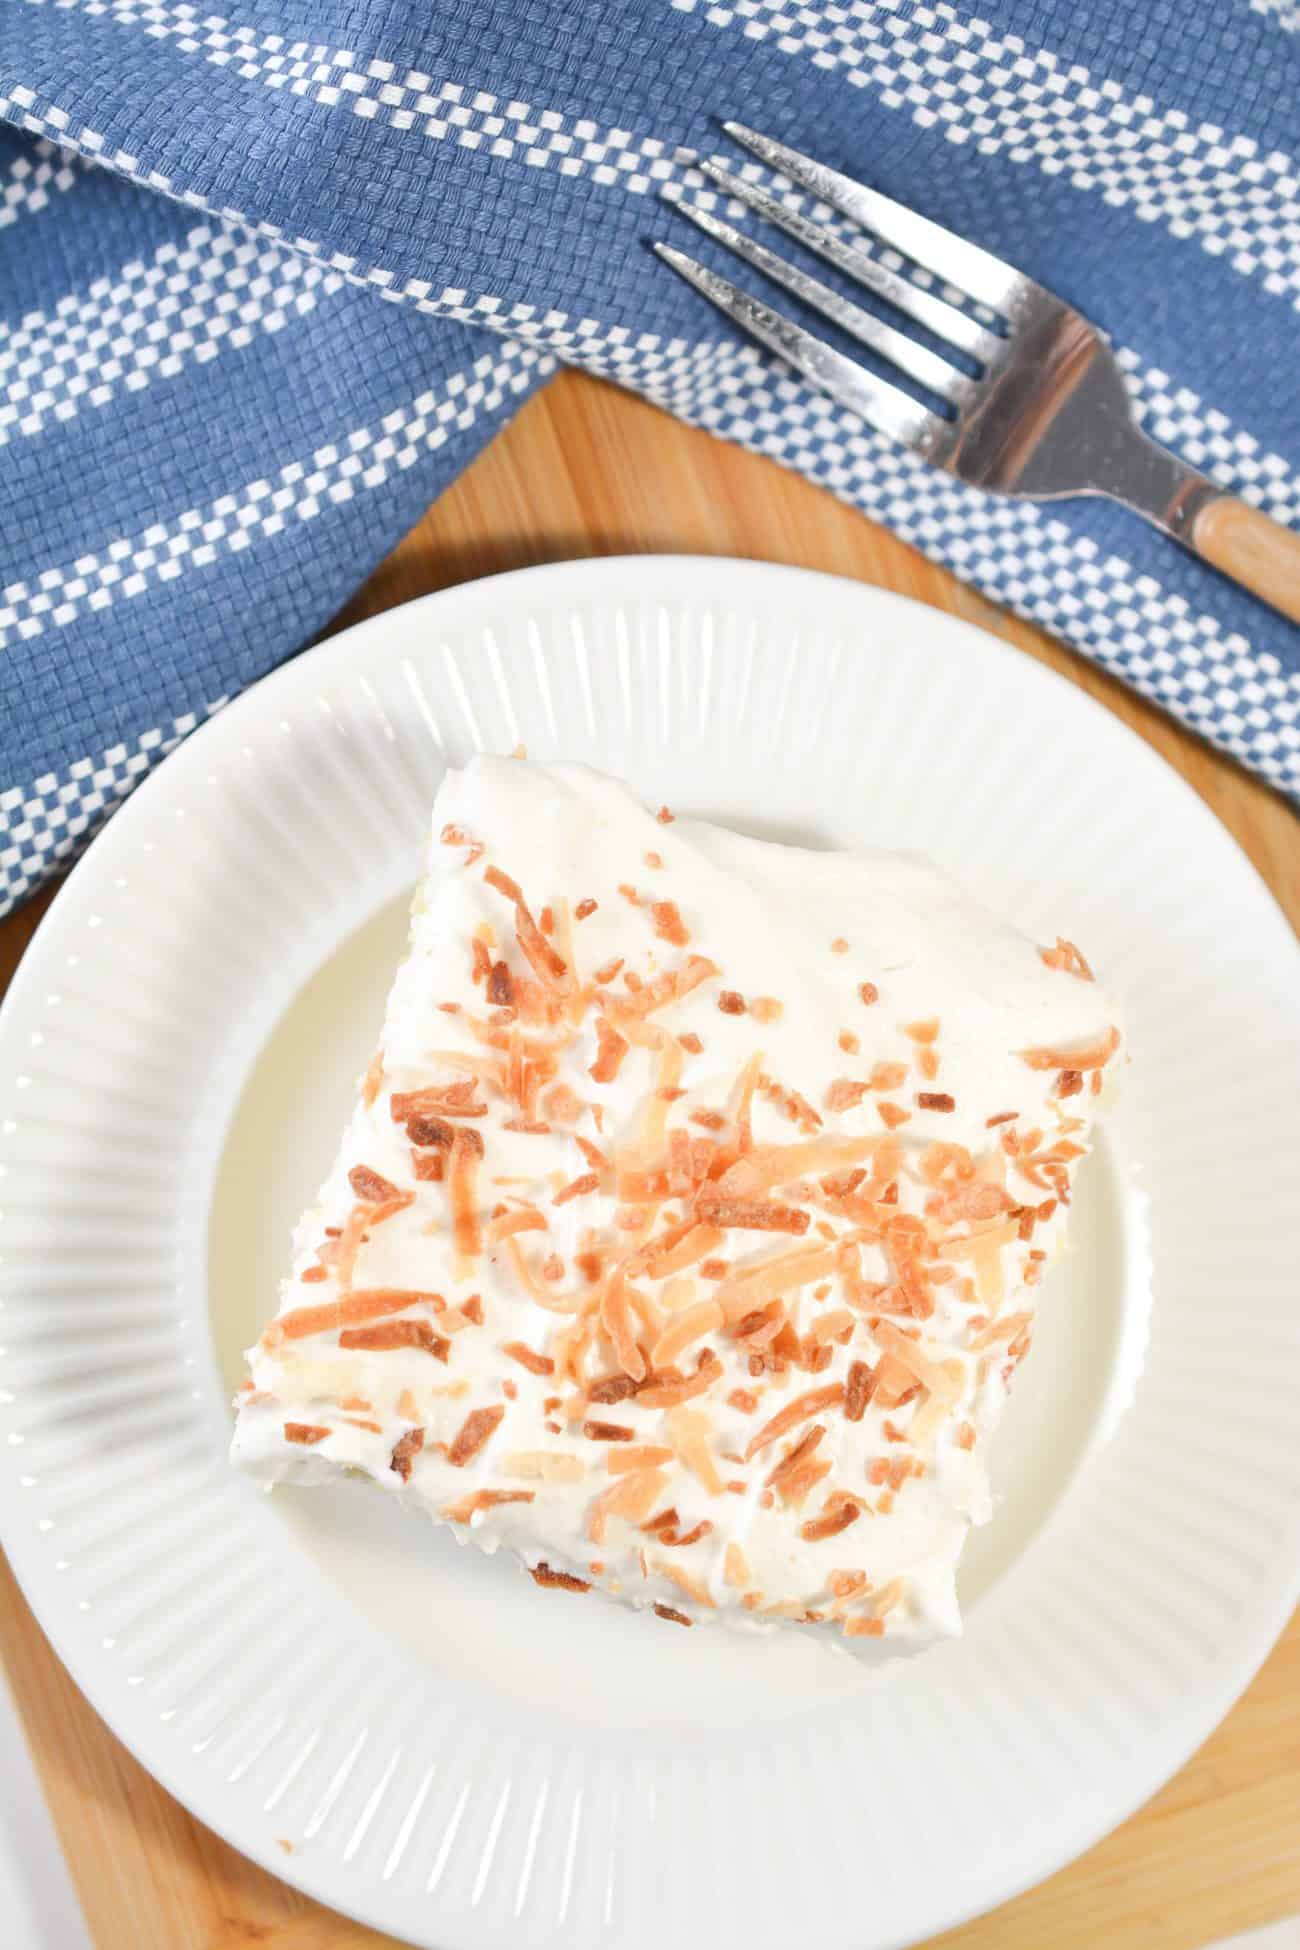 Coconut Topped Cream Cheese Sheet Cake